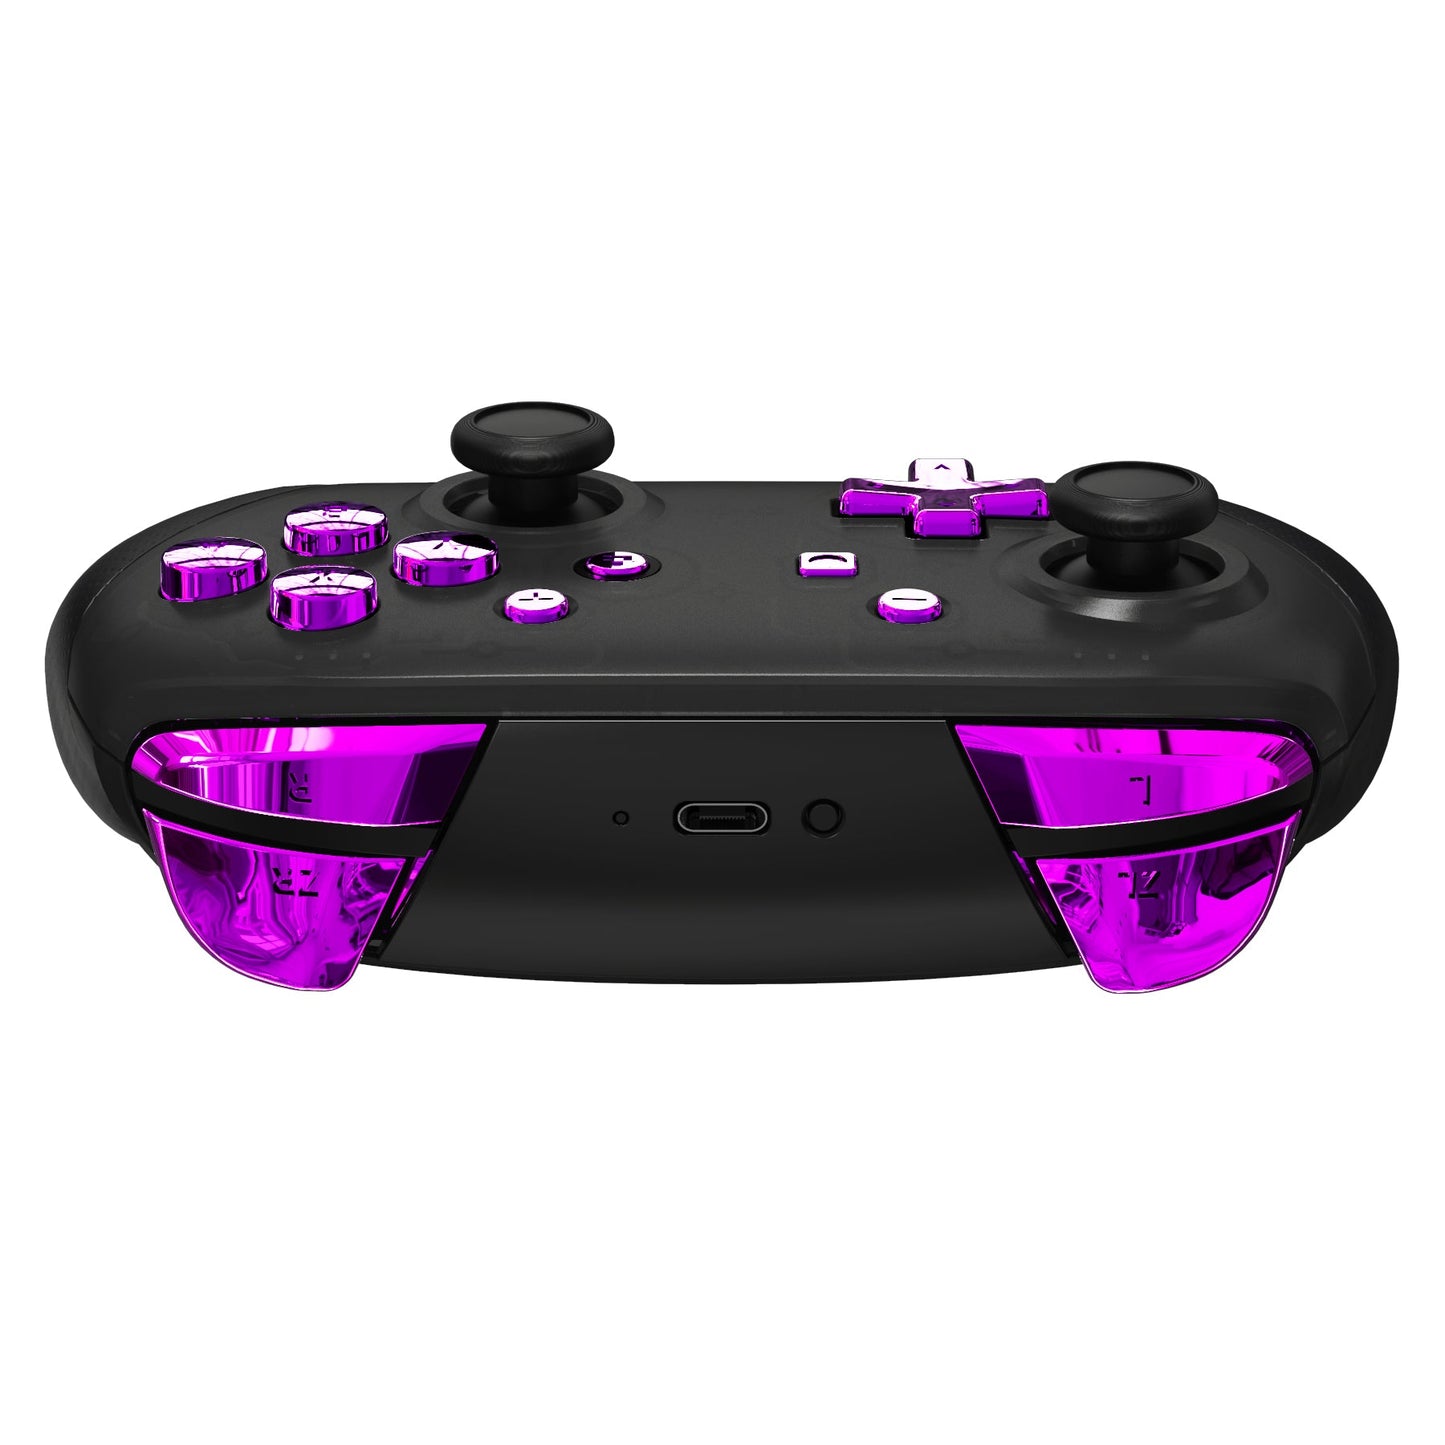 eXtremeRate Retail Chrome Purple Repair ABXY D-pad ZR ZL L R Keys for NS Switch Pro Controller, Glossy DIY Replacement Full Set Buttons with Tools for NS Switch Pro - Controller NOT Included - KRD405